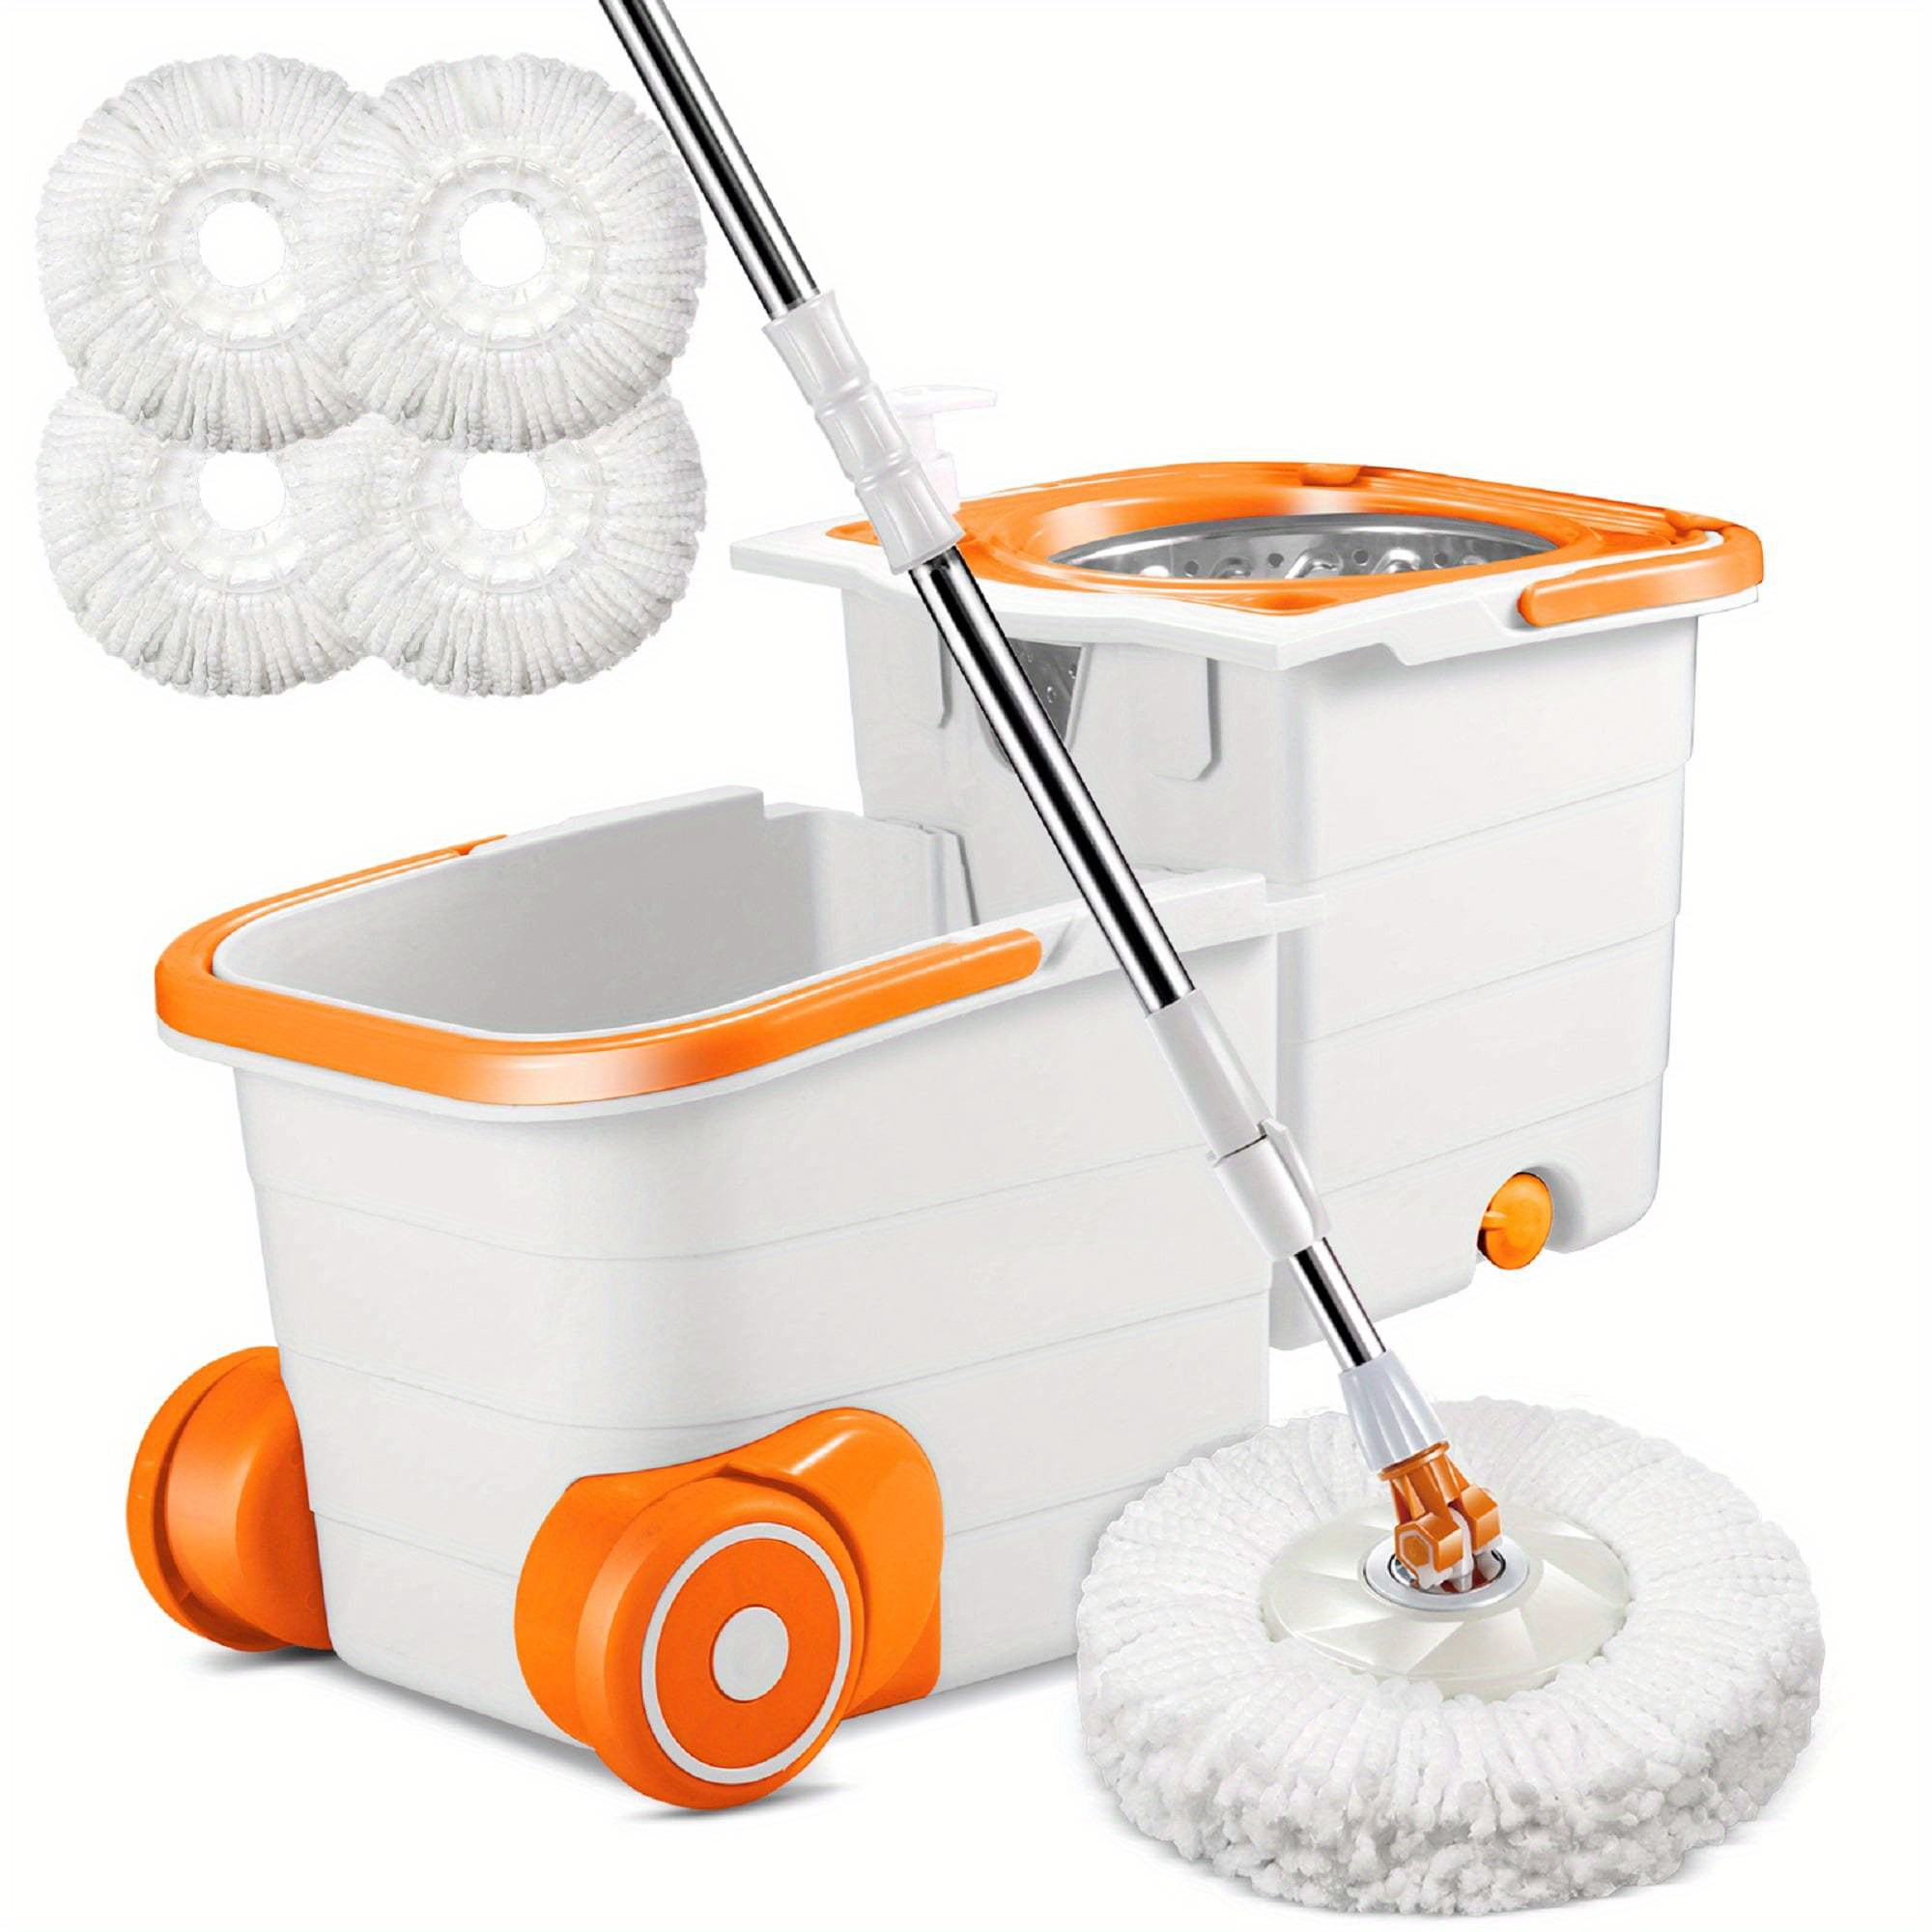 

Mastertop Mop And Bucket Wringer Set For Floor, Spin Mop And Bucket System Set With 4 Microfiber Mop Pads